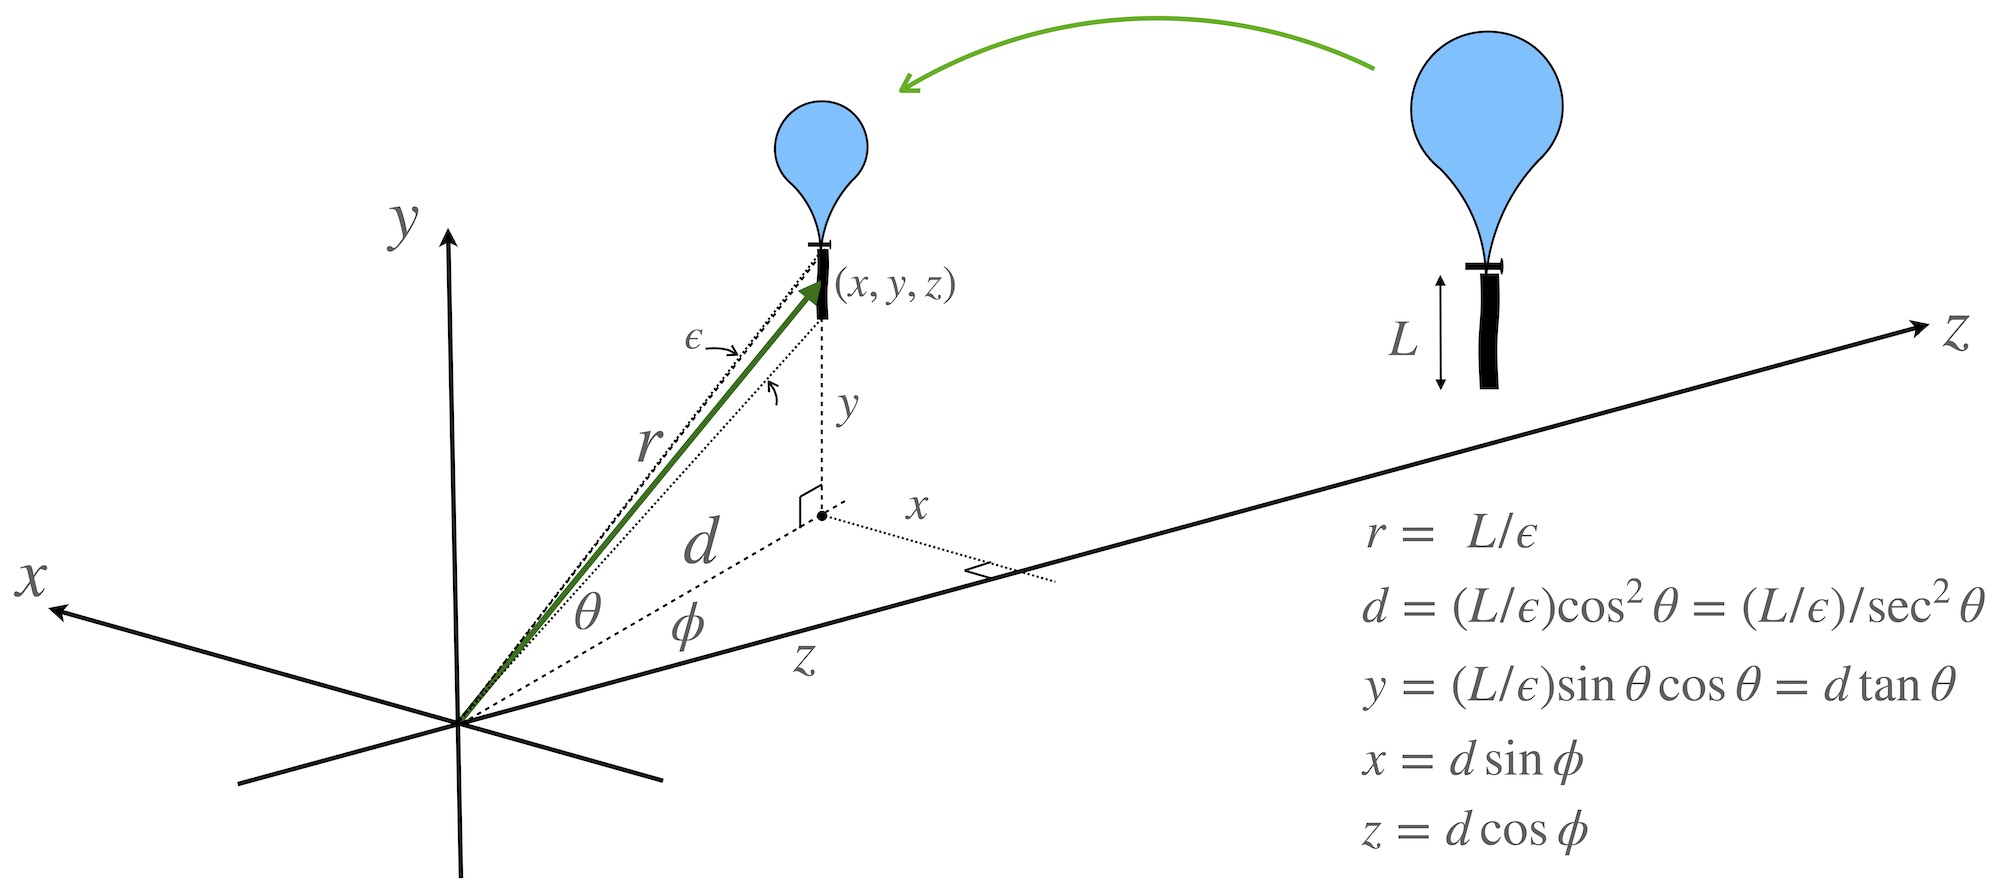 Sketch of balloon traveling in space, with coordinates (x,y,z).